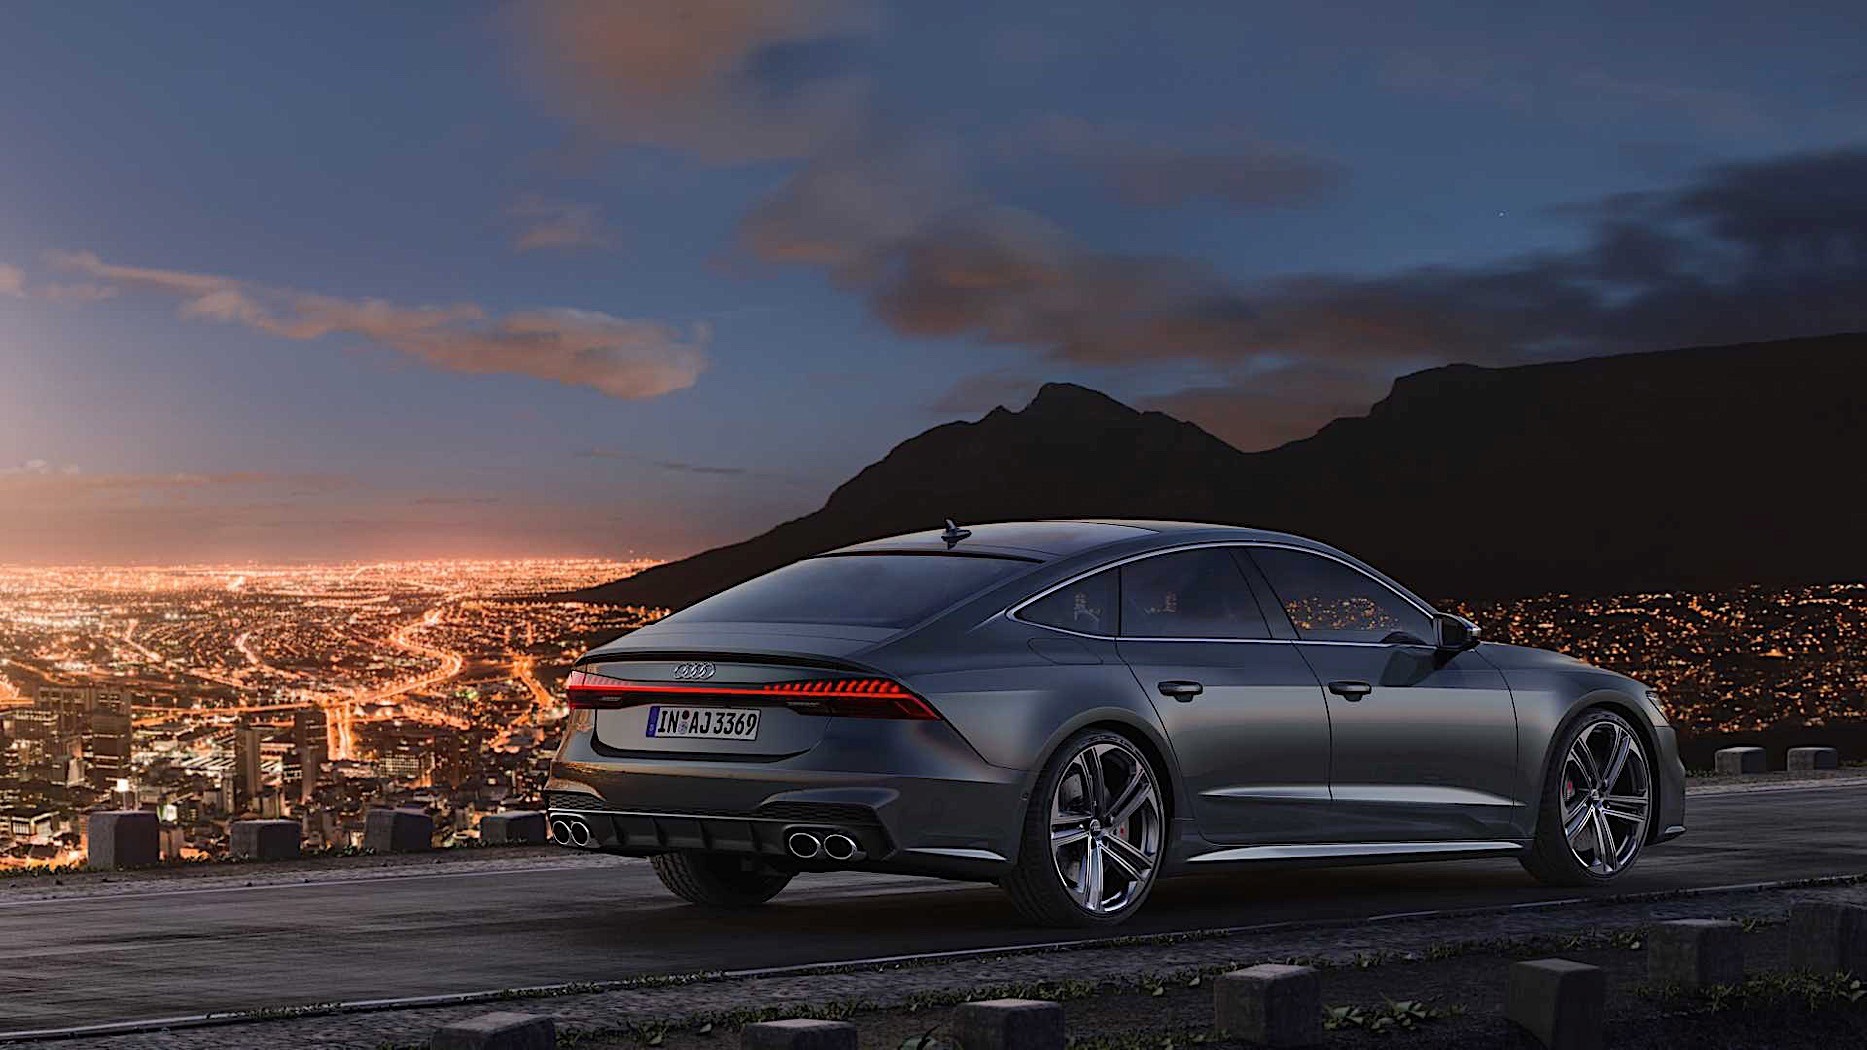 2020 Audi S7 Priced From $83,900 in the U.S. - autoevolution